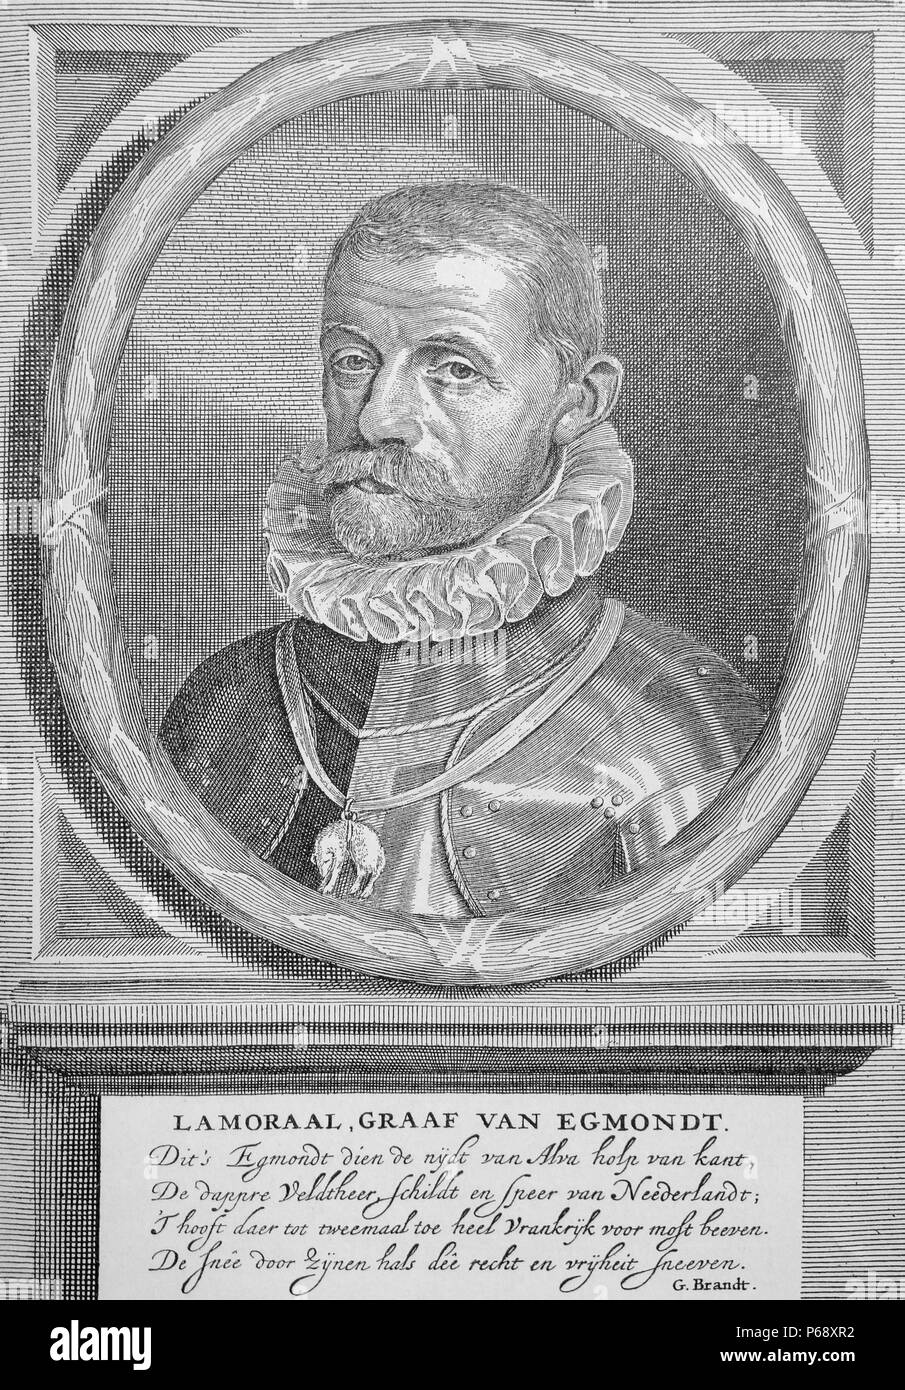 Lamoral; Count of Egmont; Prince of Gavere (November 18; 1522 – June 5; 1568). General and statesman in the Habsburg Netherlands. His execution helped spark the national uprising that eventually led to the independence of the Netherlands. Stock Photo